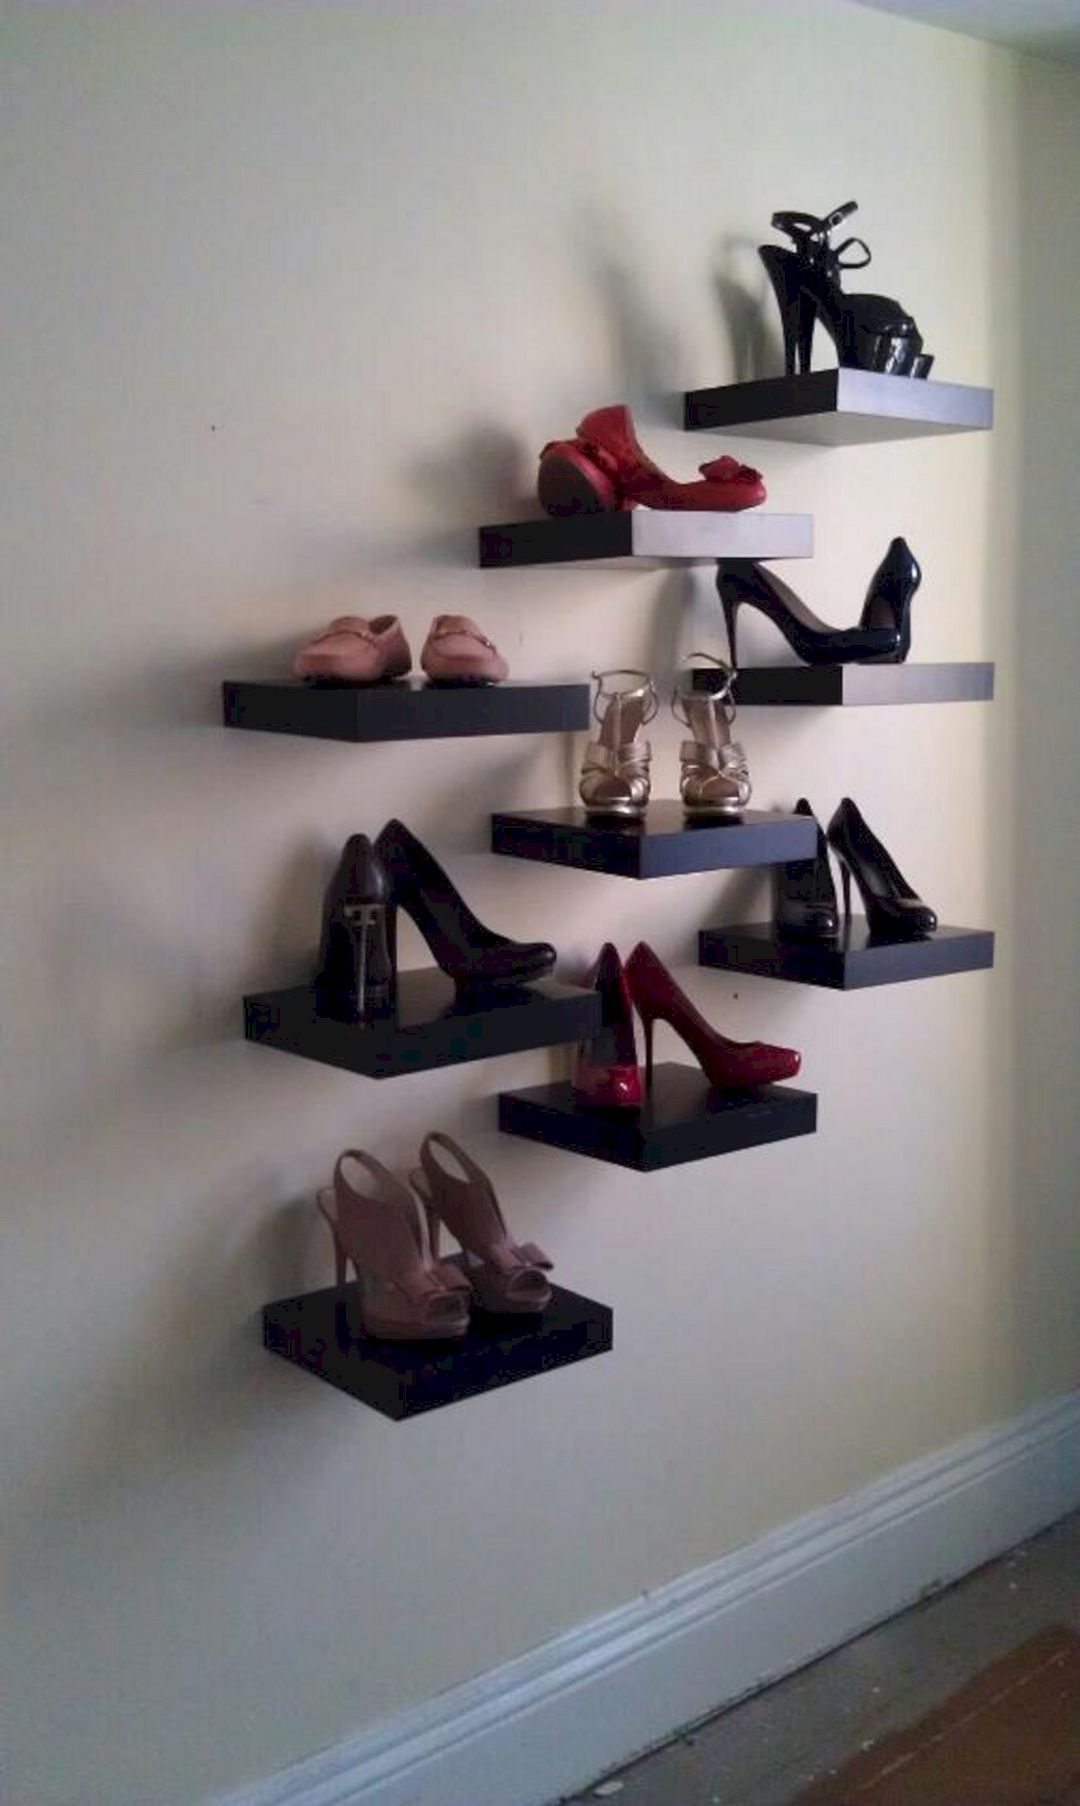 easy diy free standing shoe cabinet ideas explore ikea floating shelves for shoes stunning shelf entryway entrance components decor coastal under console open wall bookshelves